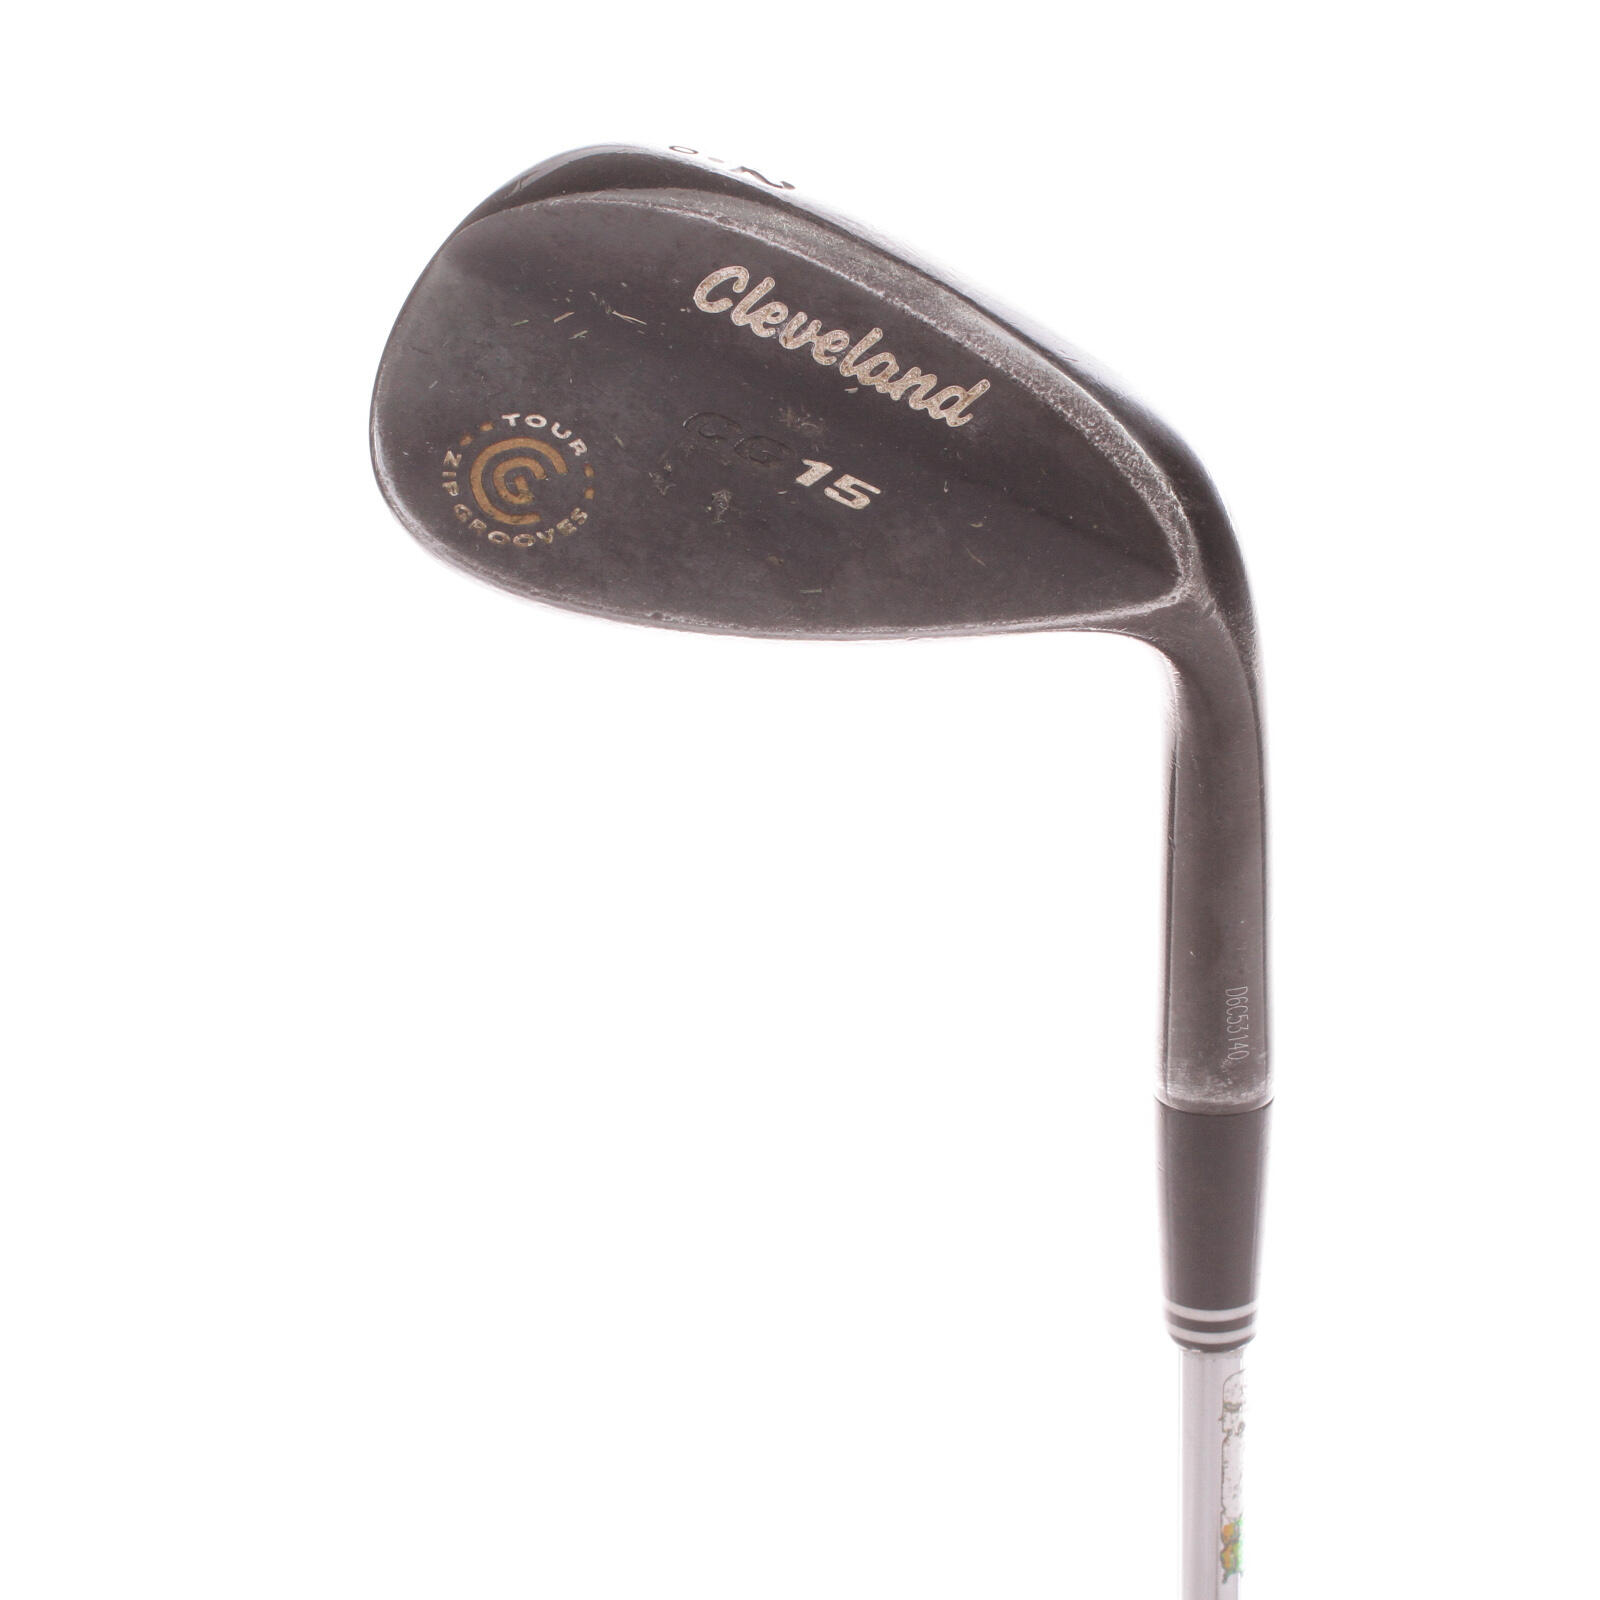 CLEVELAND GOLF USED - Gap Wedge Cleveland CG15 52 Degree Steel Shaft Right Handed - GRADE B